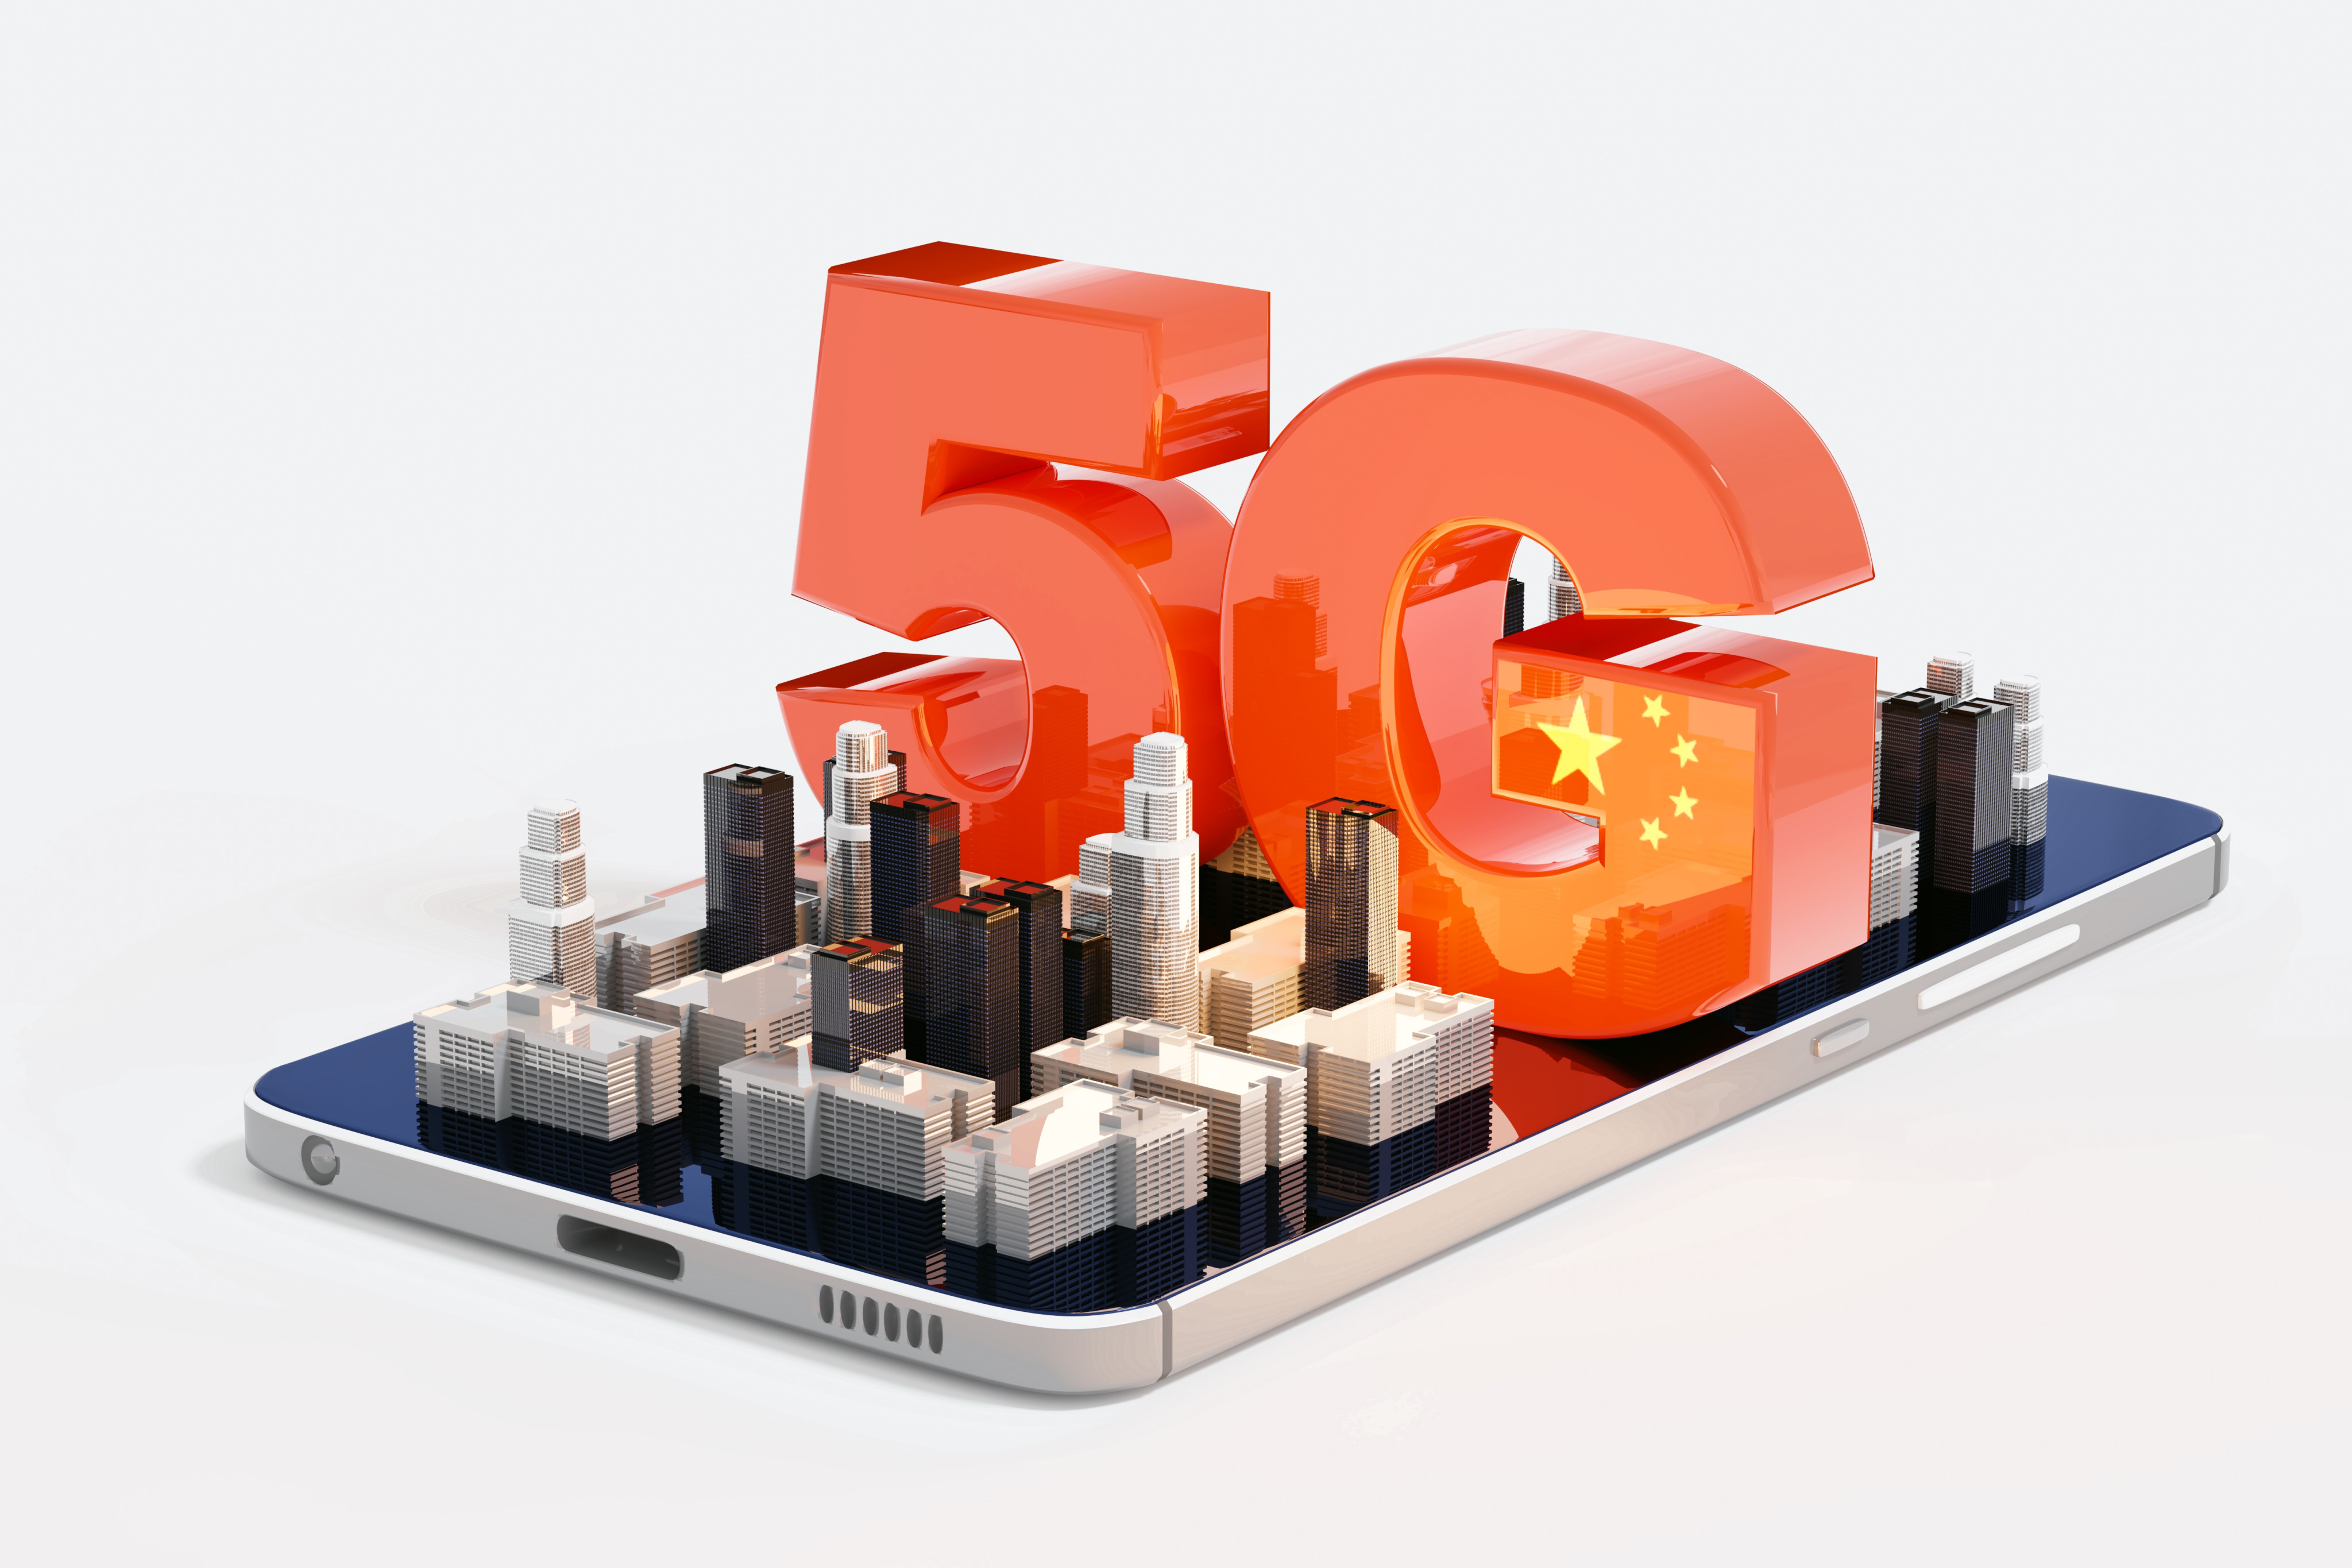 China Mobile, China Unicom and China Telecom launched their commercial 5G services on the mainland in 2019. Illustration: Shutterstock